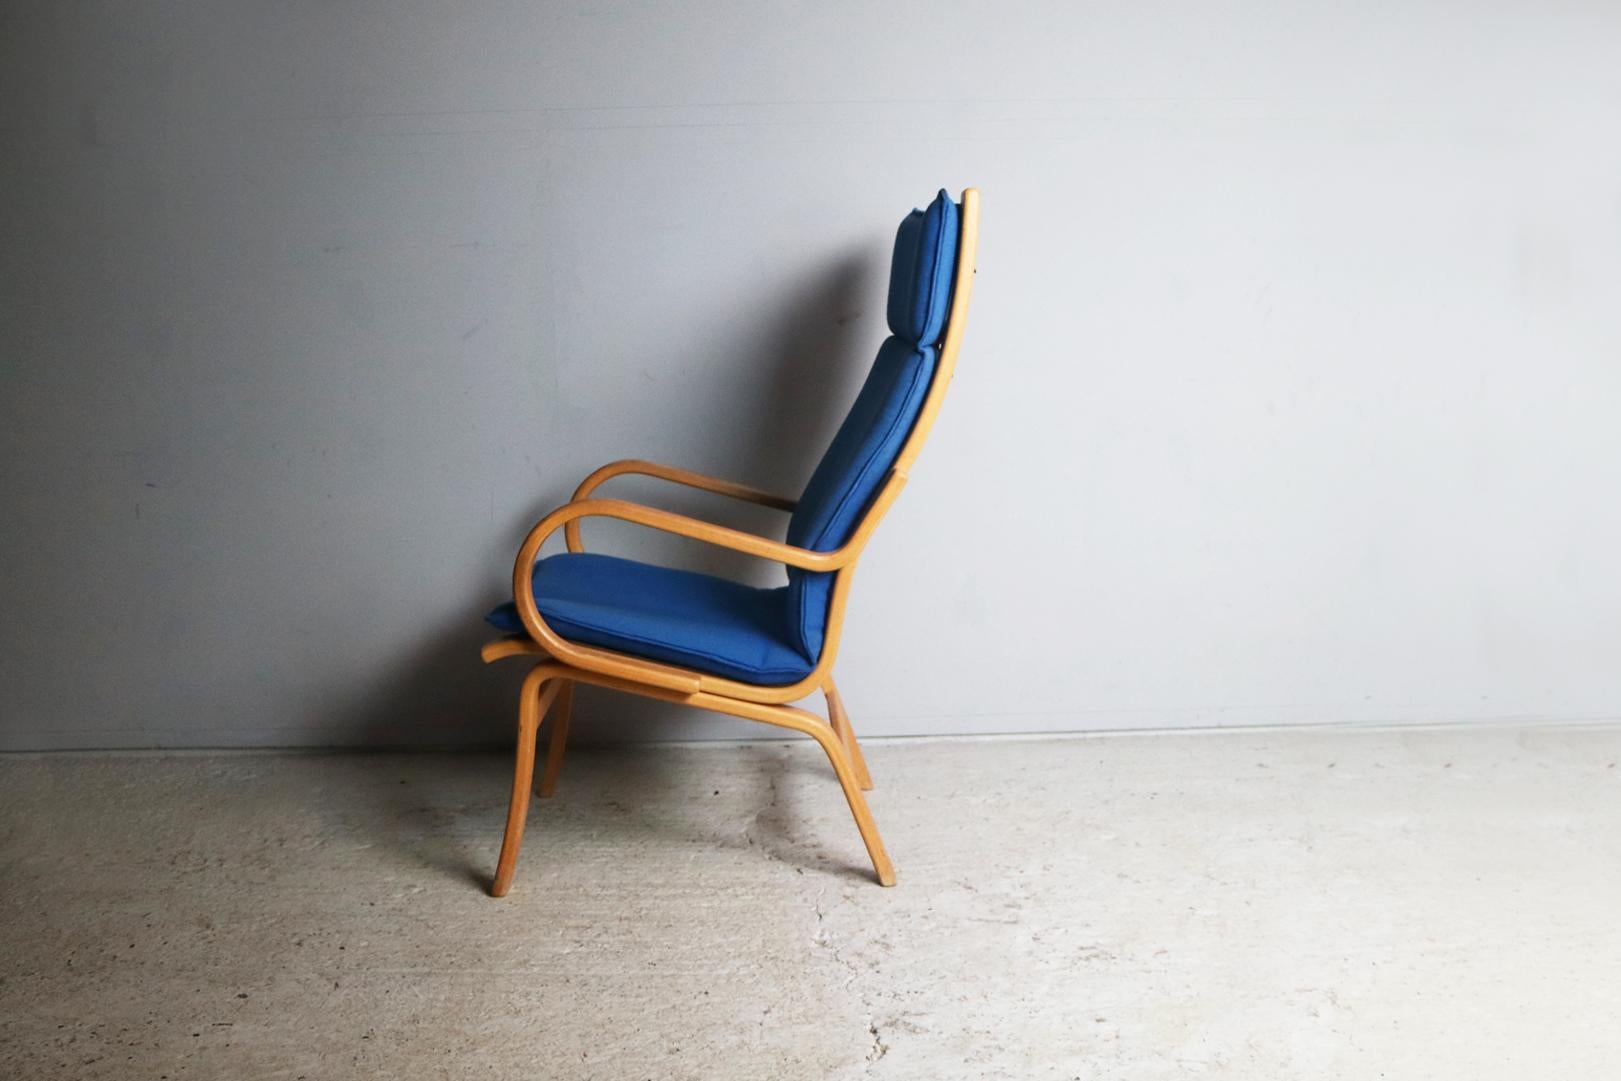 This 1970s Scandinavian lounge chair has a plain beech bentwood frame, with one a one piece woollen fabric backrest and seat cushion.

The seating is held in place by leather straps that are buckled onto the frame (see photograph).

